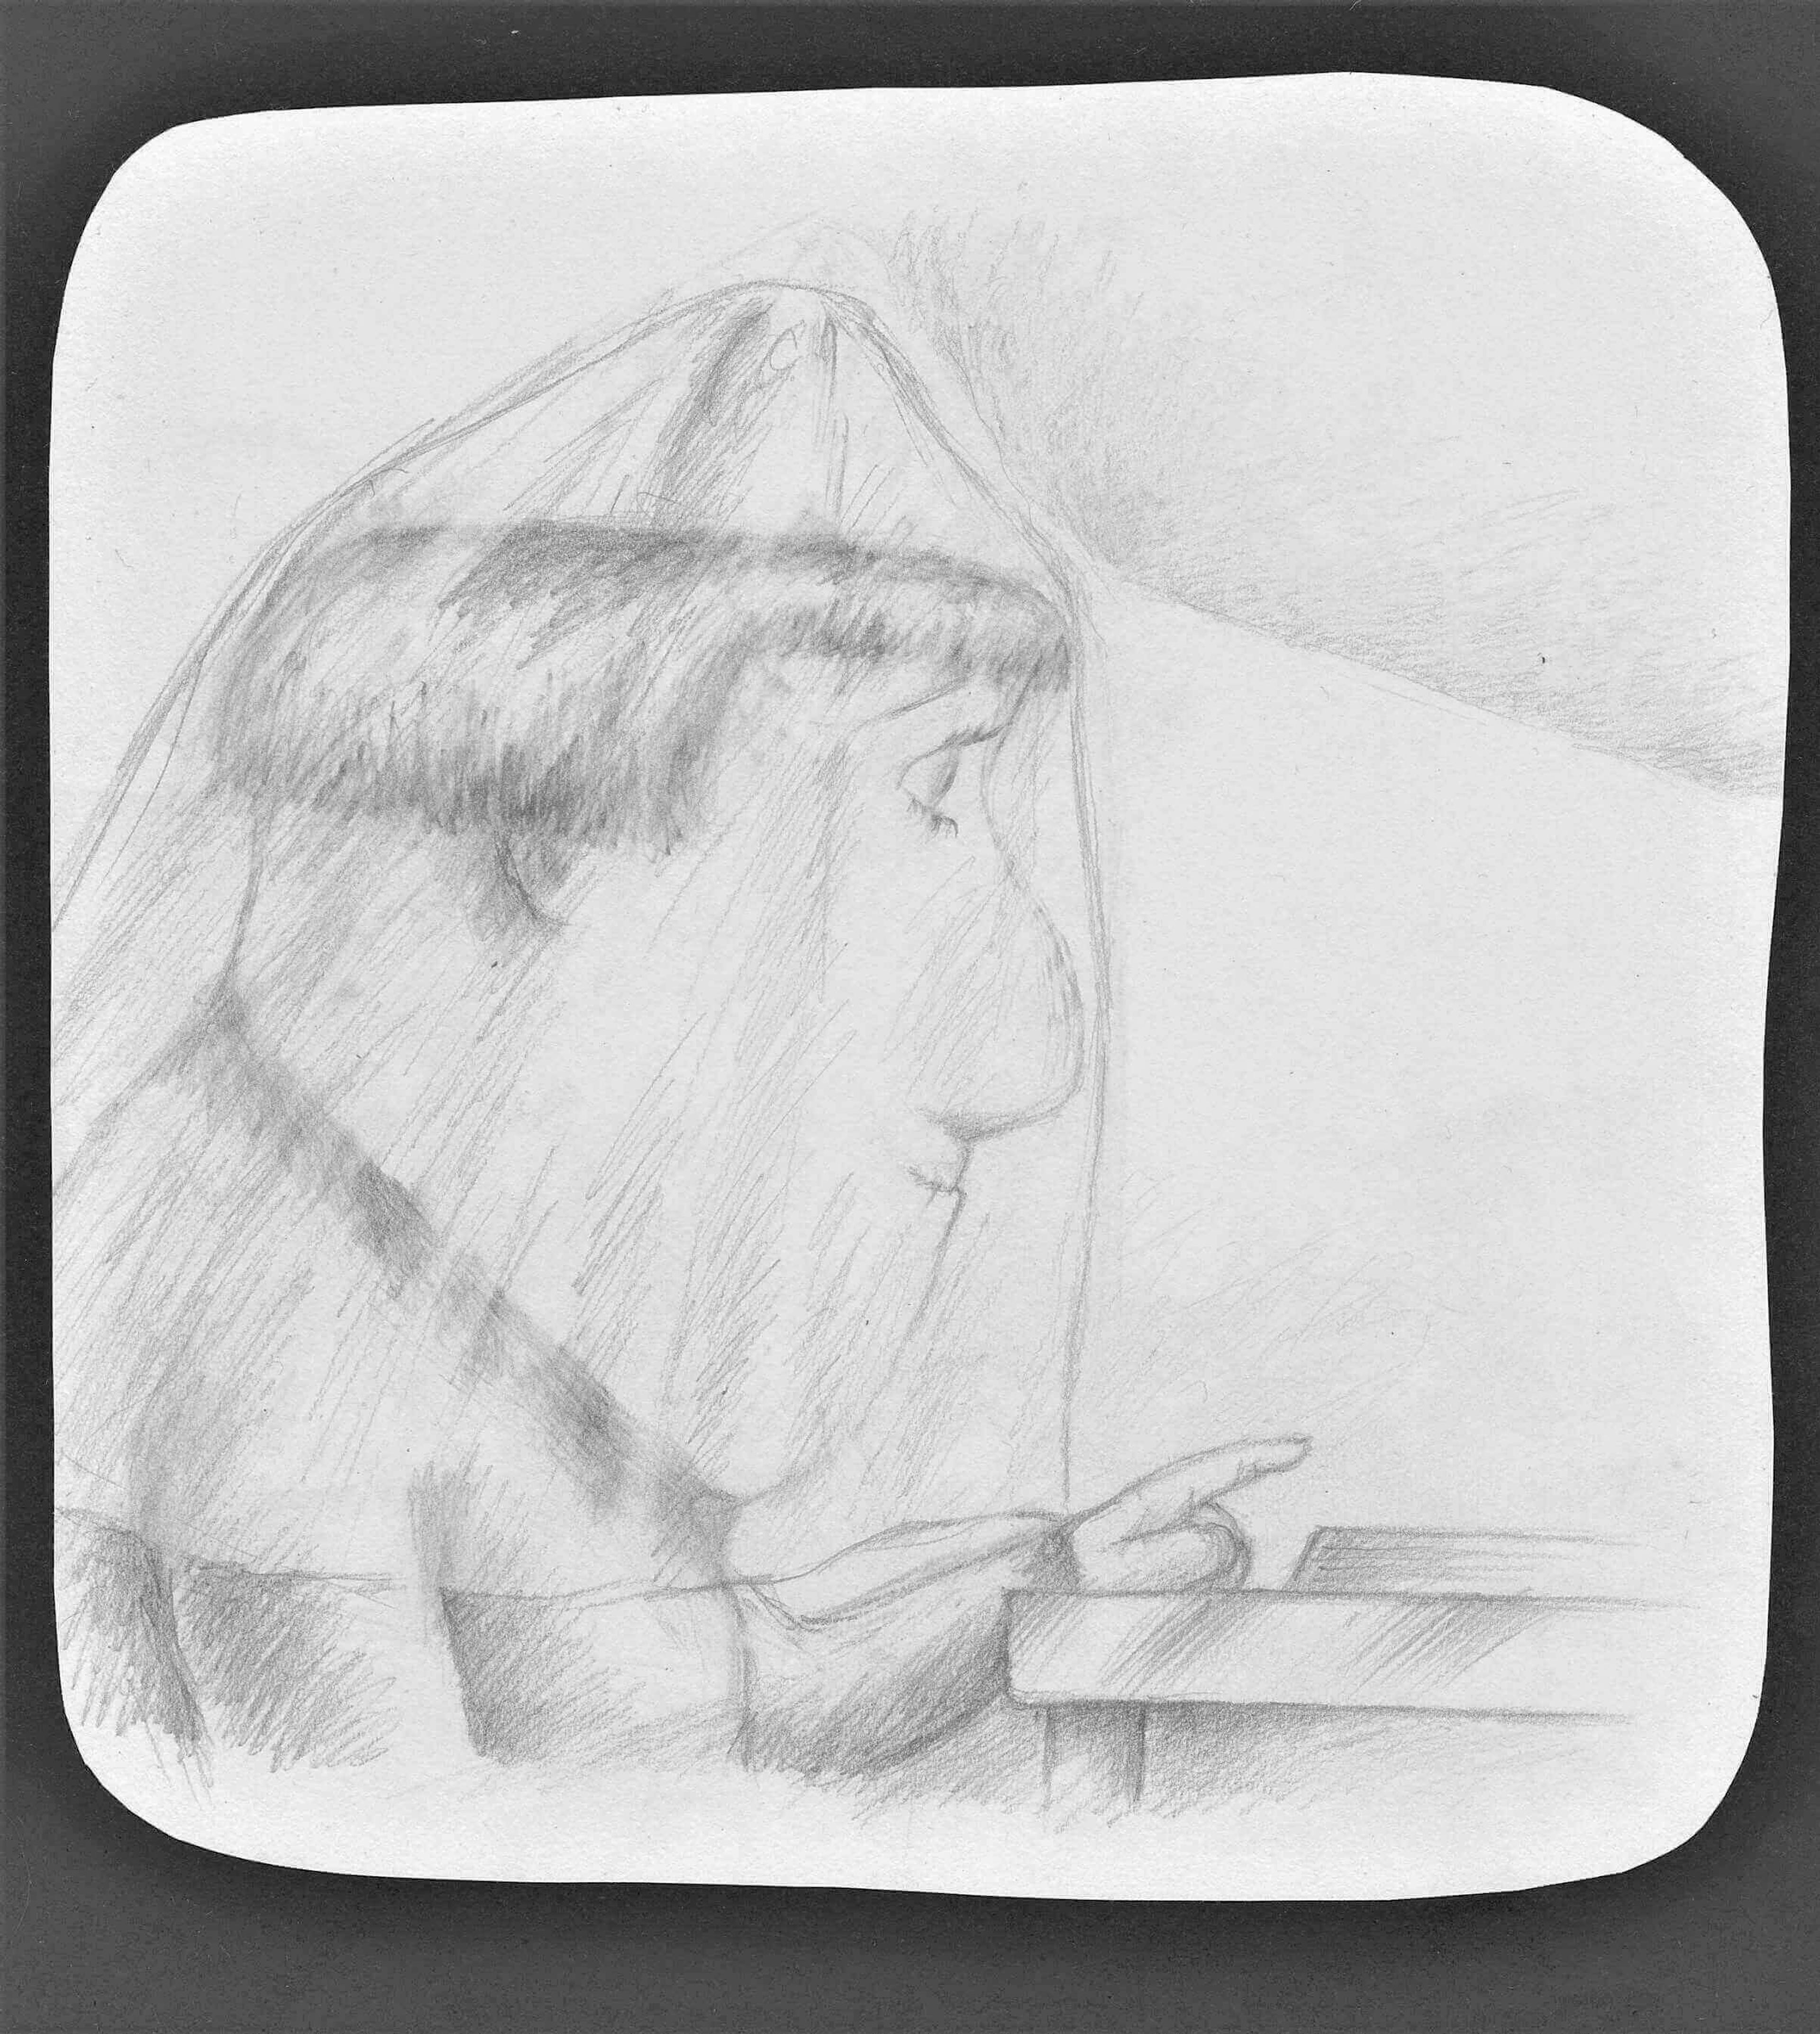 A wispy pencil sketch of the side profile of a stylised character sat at a desk. The character appears to be wearing a light veil.